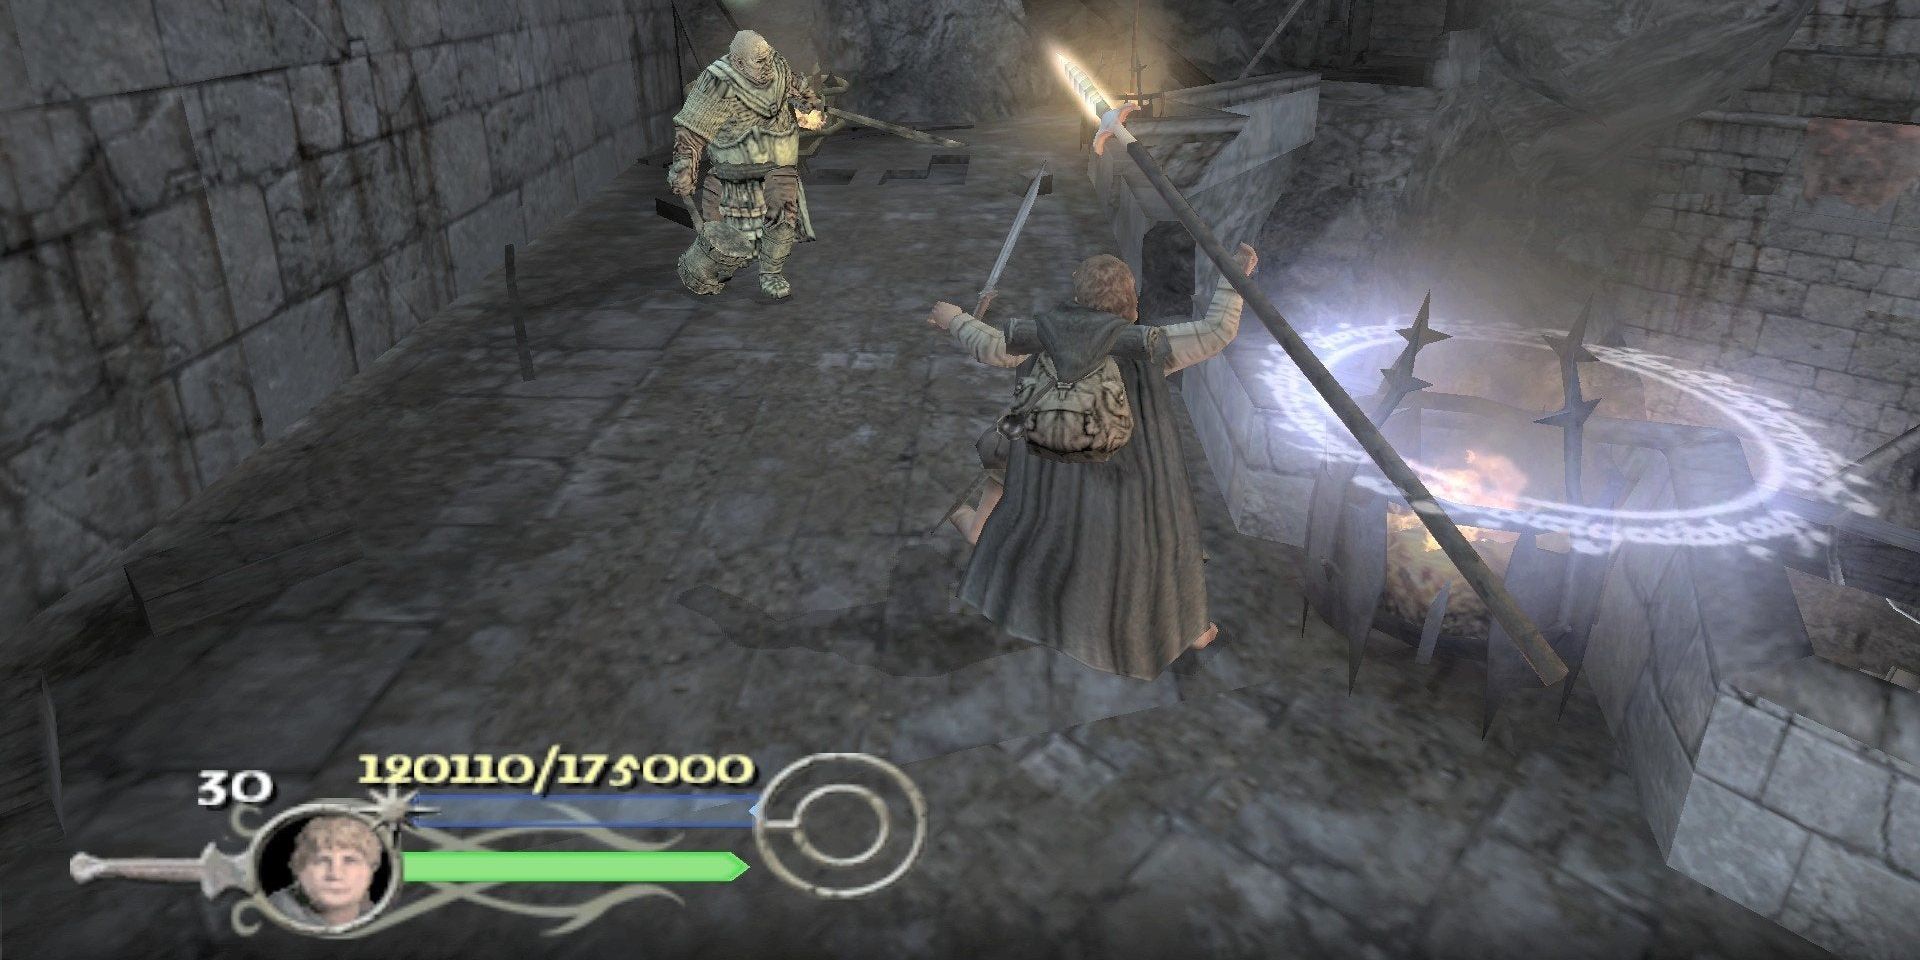 Samwise Gamgee fights an orc in The Lord of the Rings Return of the King video game